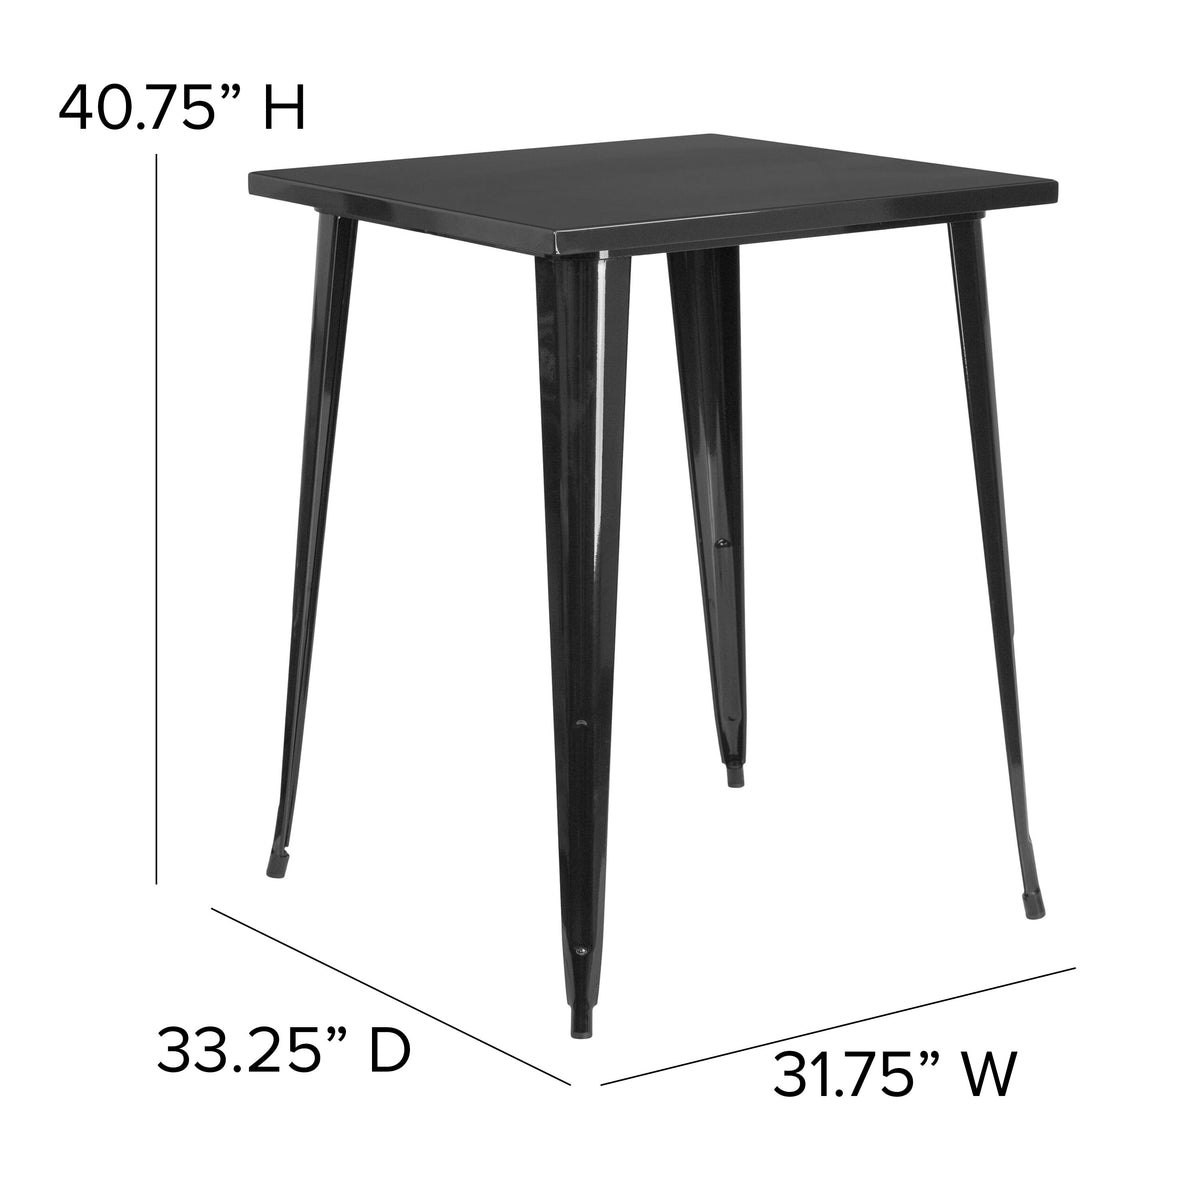 Black |#| 31.5inch Square Black Metal Indoor-Outdoor Bar Height Table - Café Table